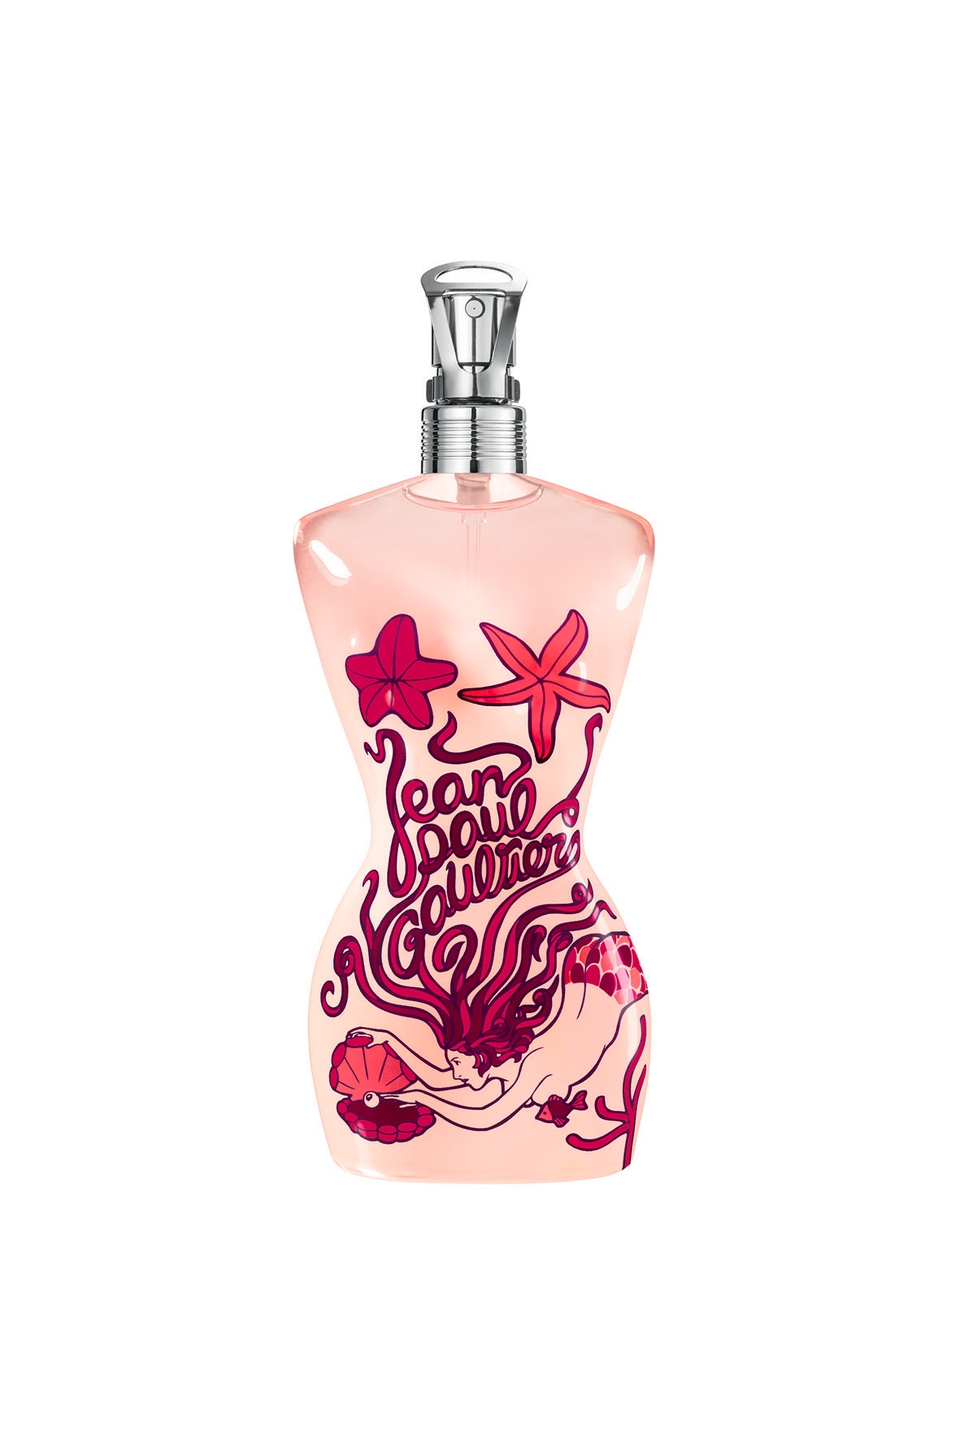 Limited Editions by Jean Paul Gaultier